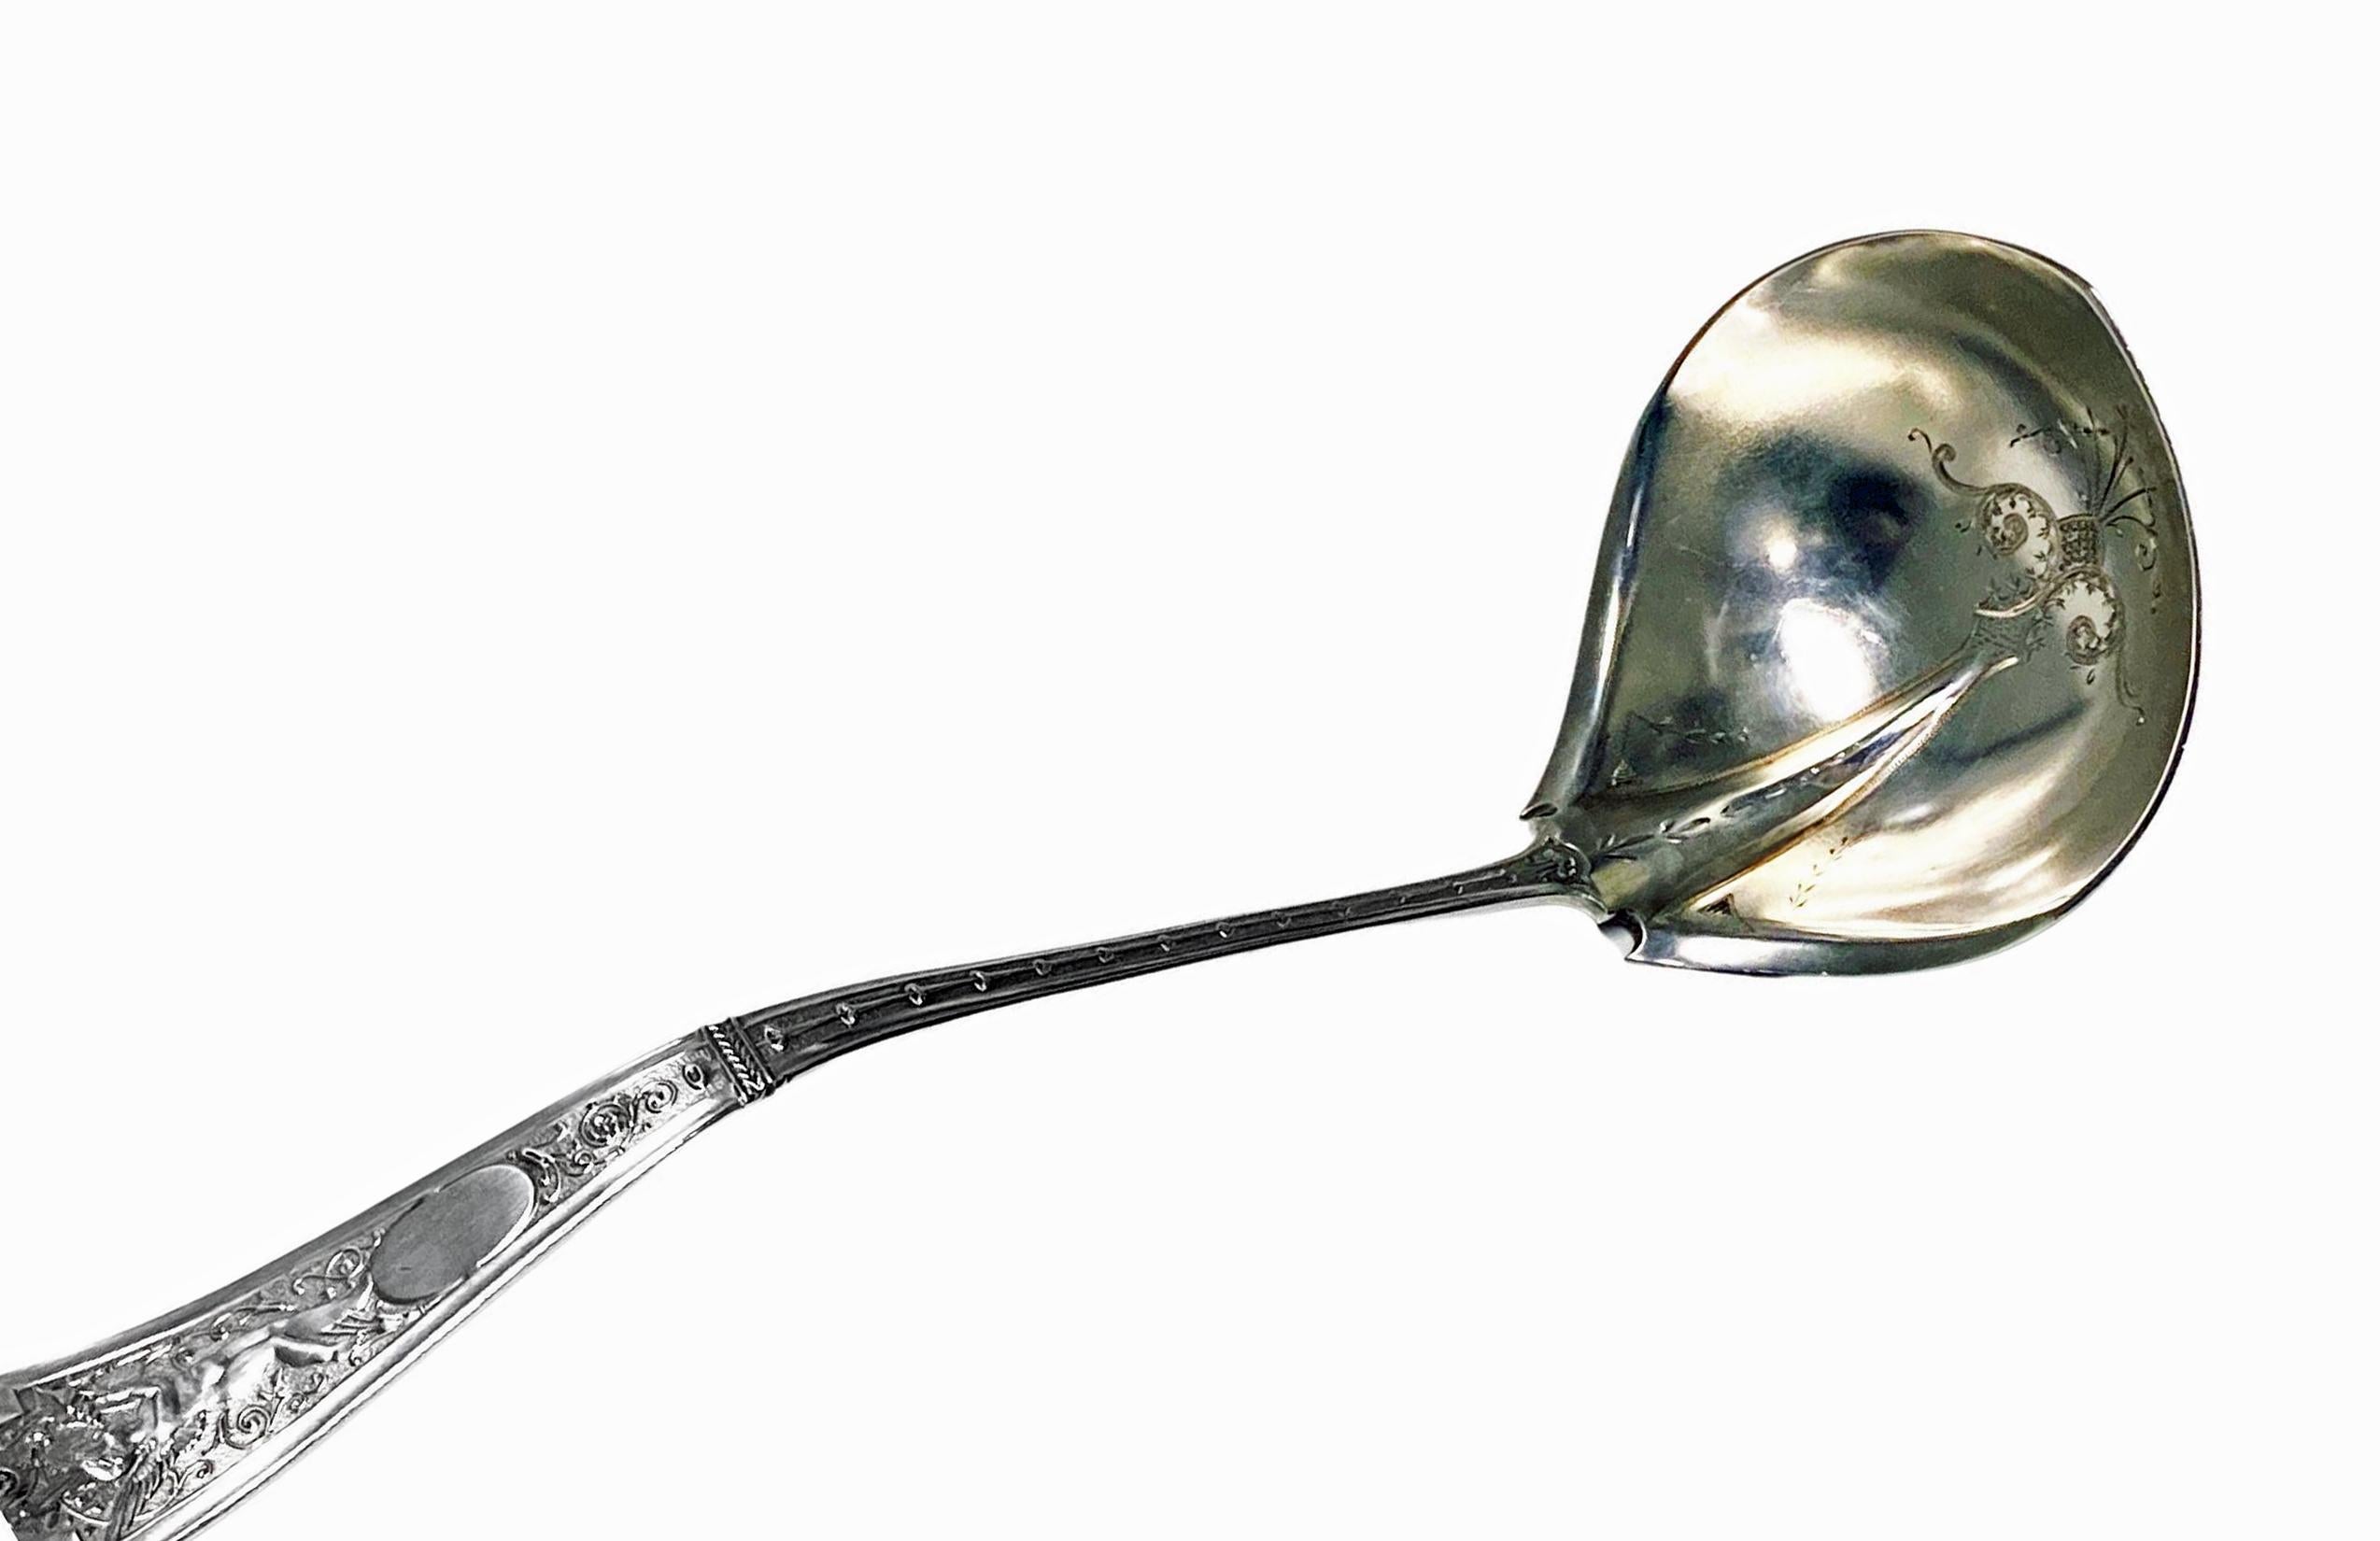 American sterling silver soup or punch Ladle Albert Coles C.1878. Sterling silver, Albert Coles, NY Sterling marks as well as the 1878 